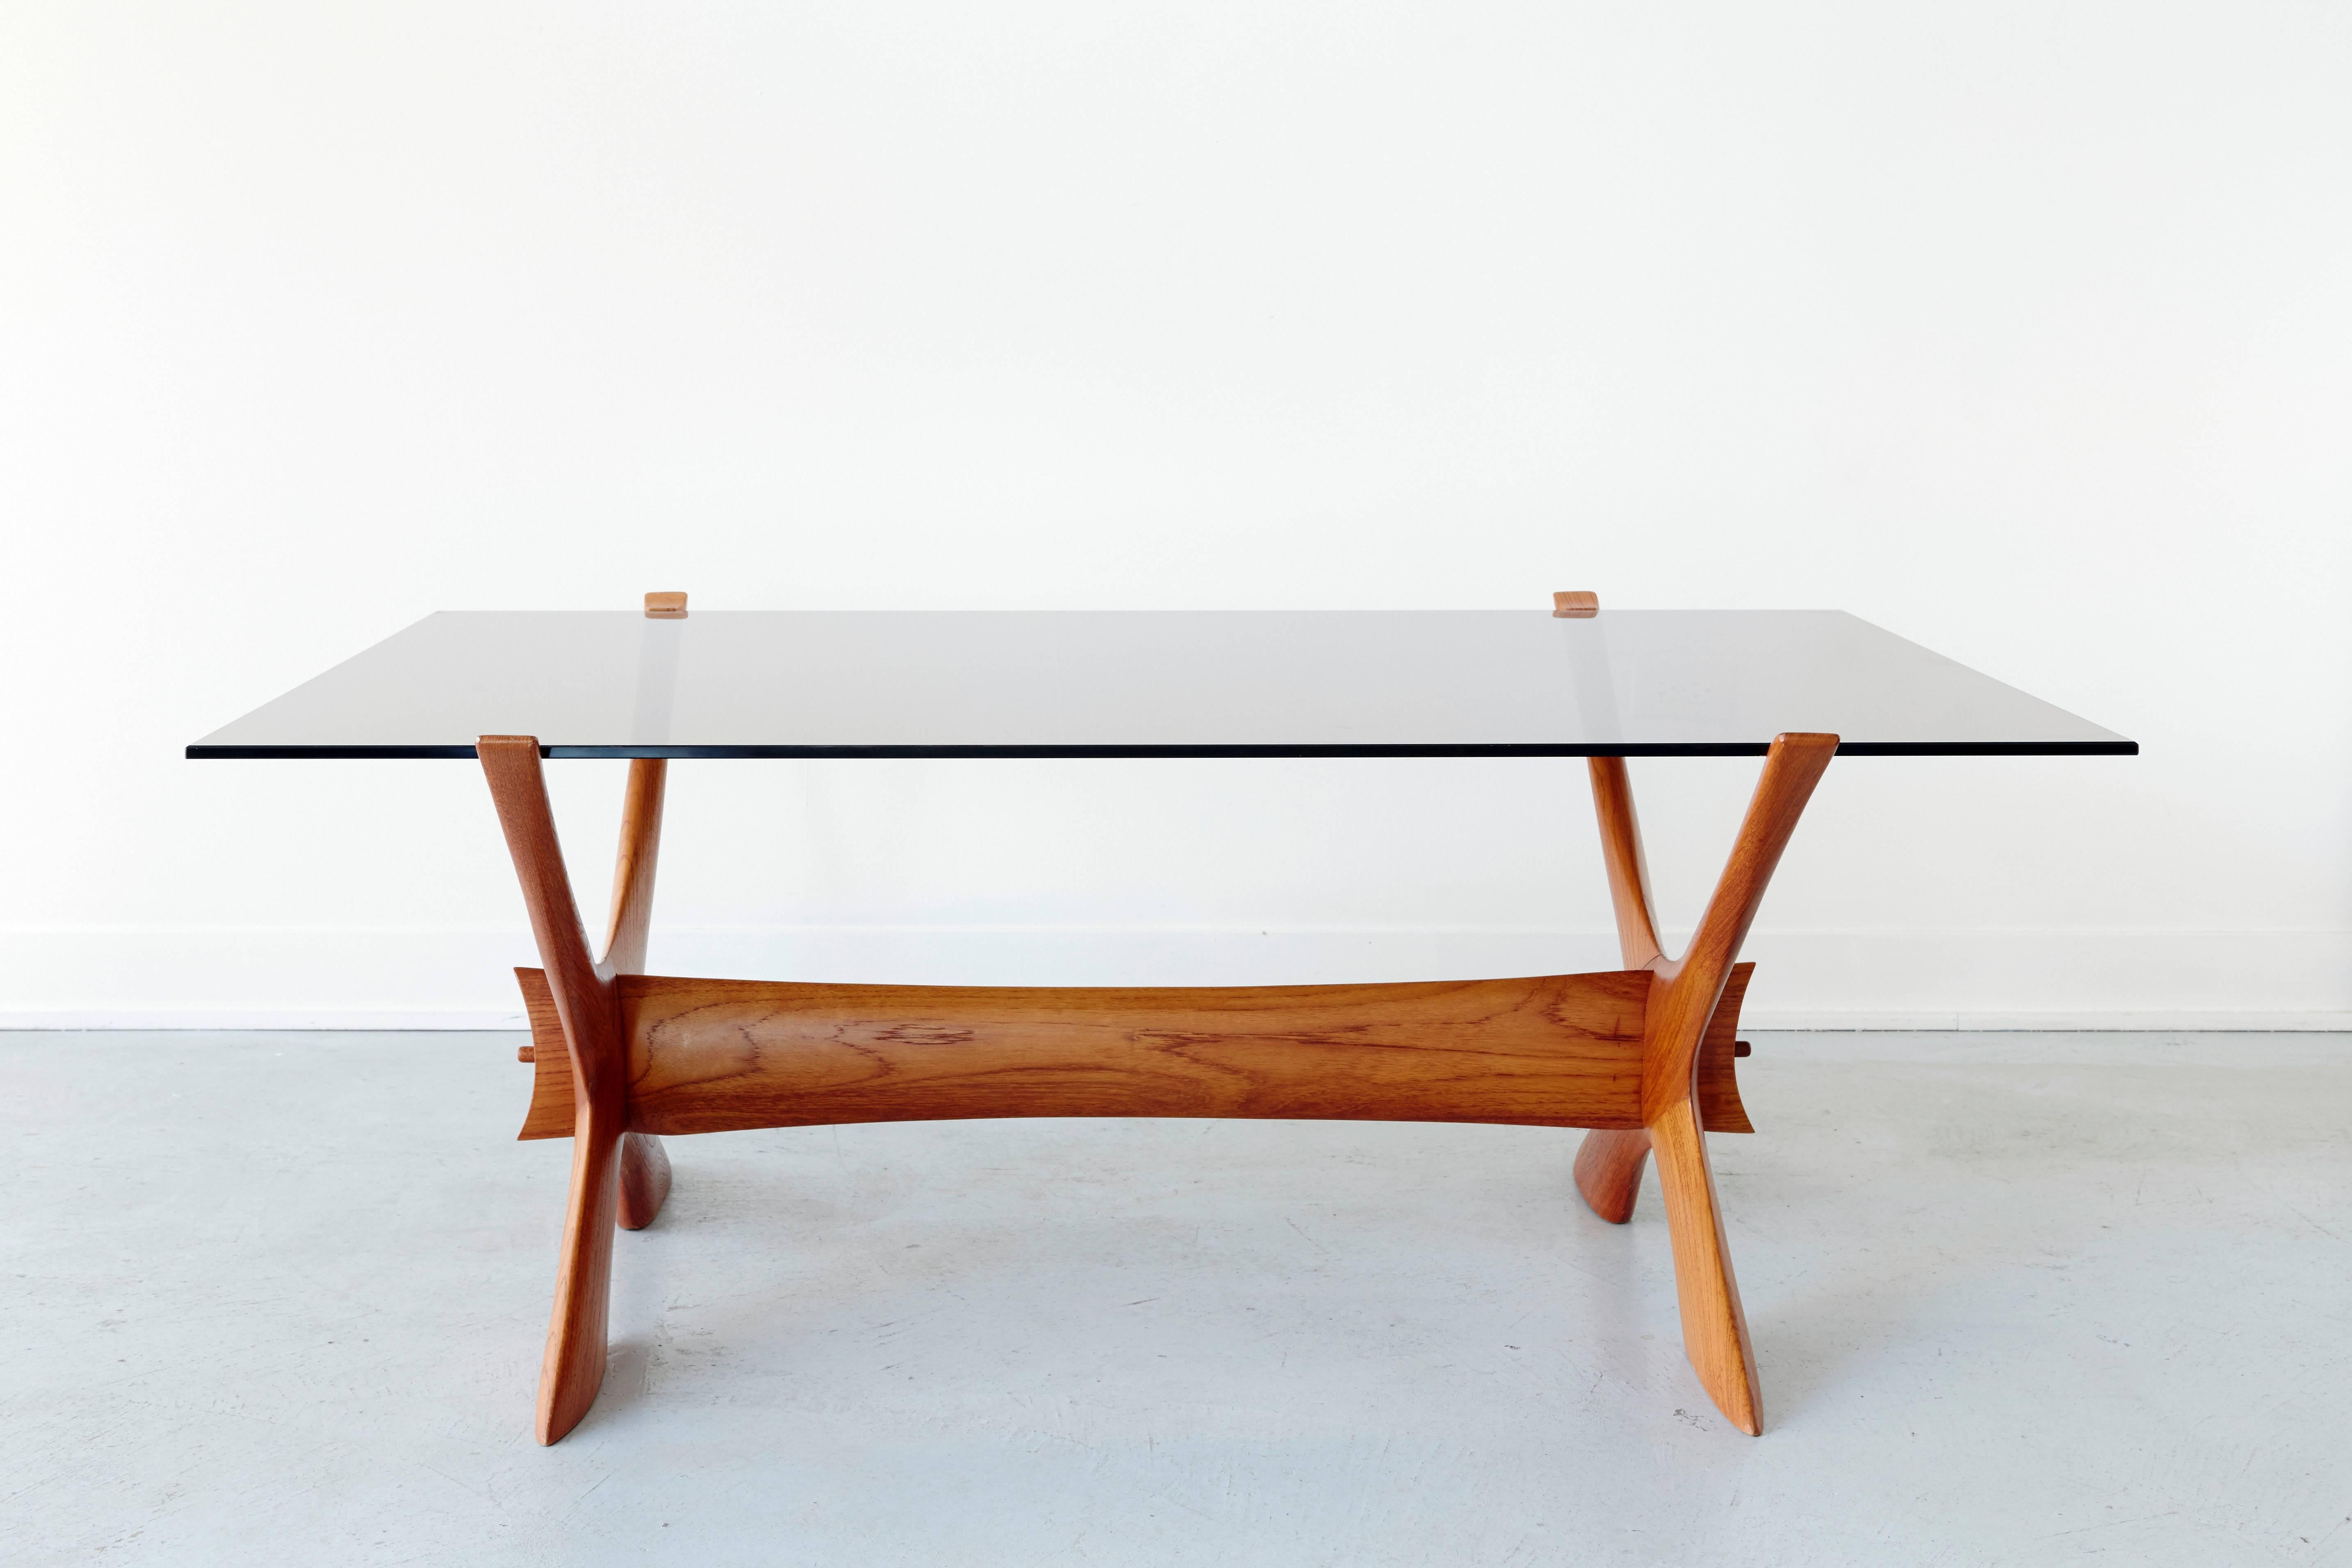 Illum Wikkelsø sculptural coffee table in teakwood. Mint original condition. Glass top has a blue smoked tint.